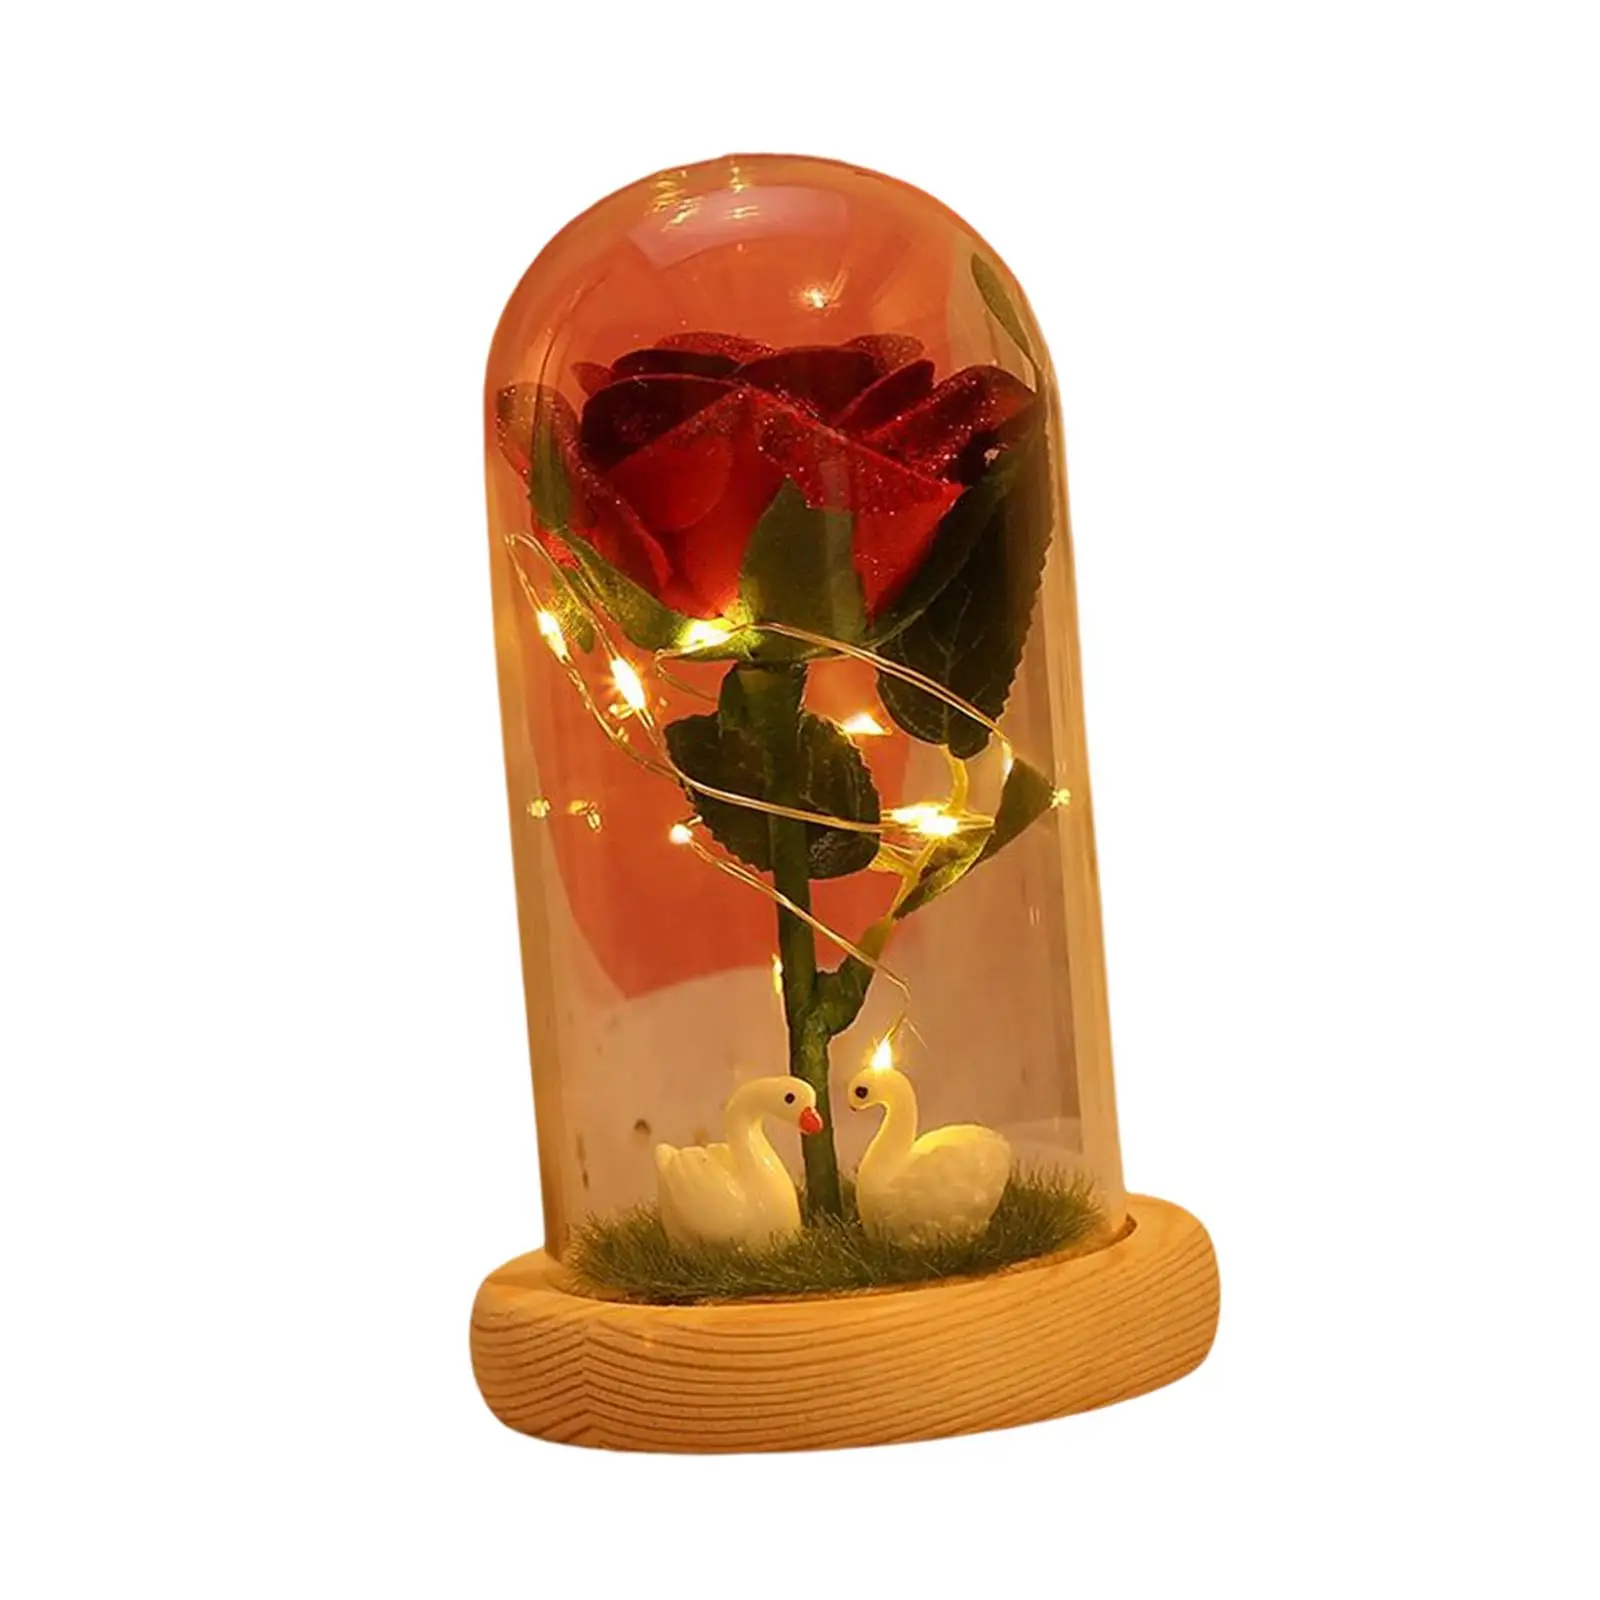 Romantic light with Base Arrangements Simulated Flowers Ornaments for Valentines Day Gift Home Decoration Girls